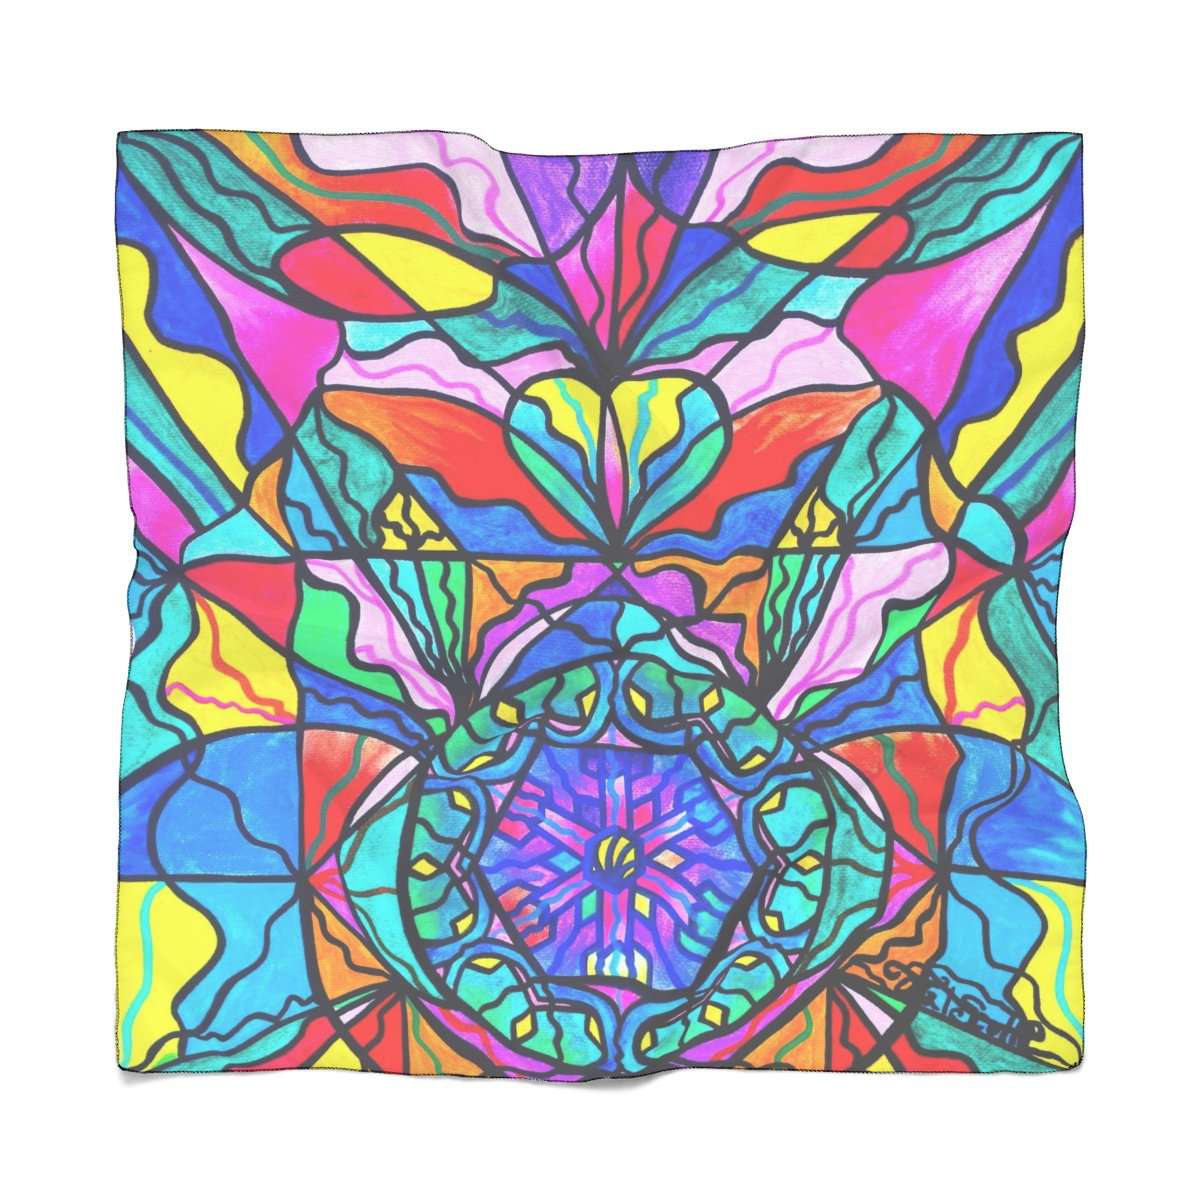 shop-without-worry-for-anahata-heart-chakra-frequency-scarf-online-hot-sale_5.jpg